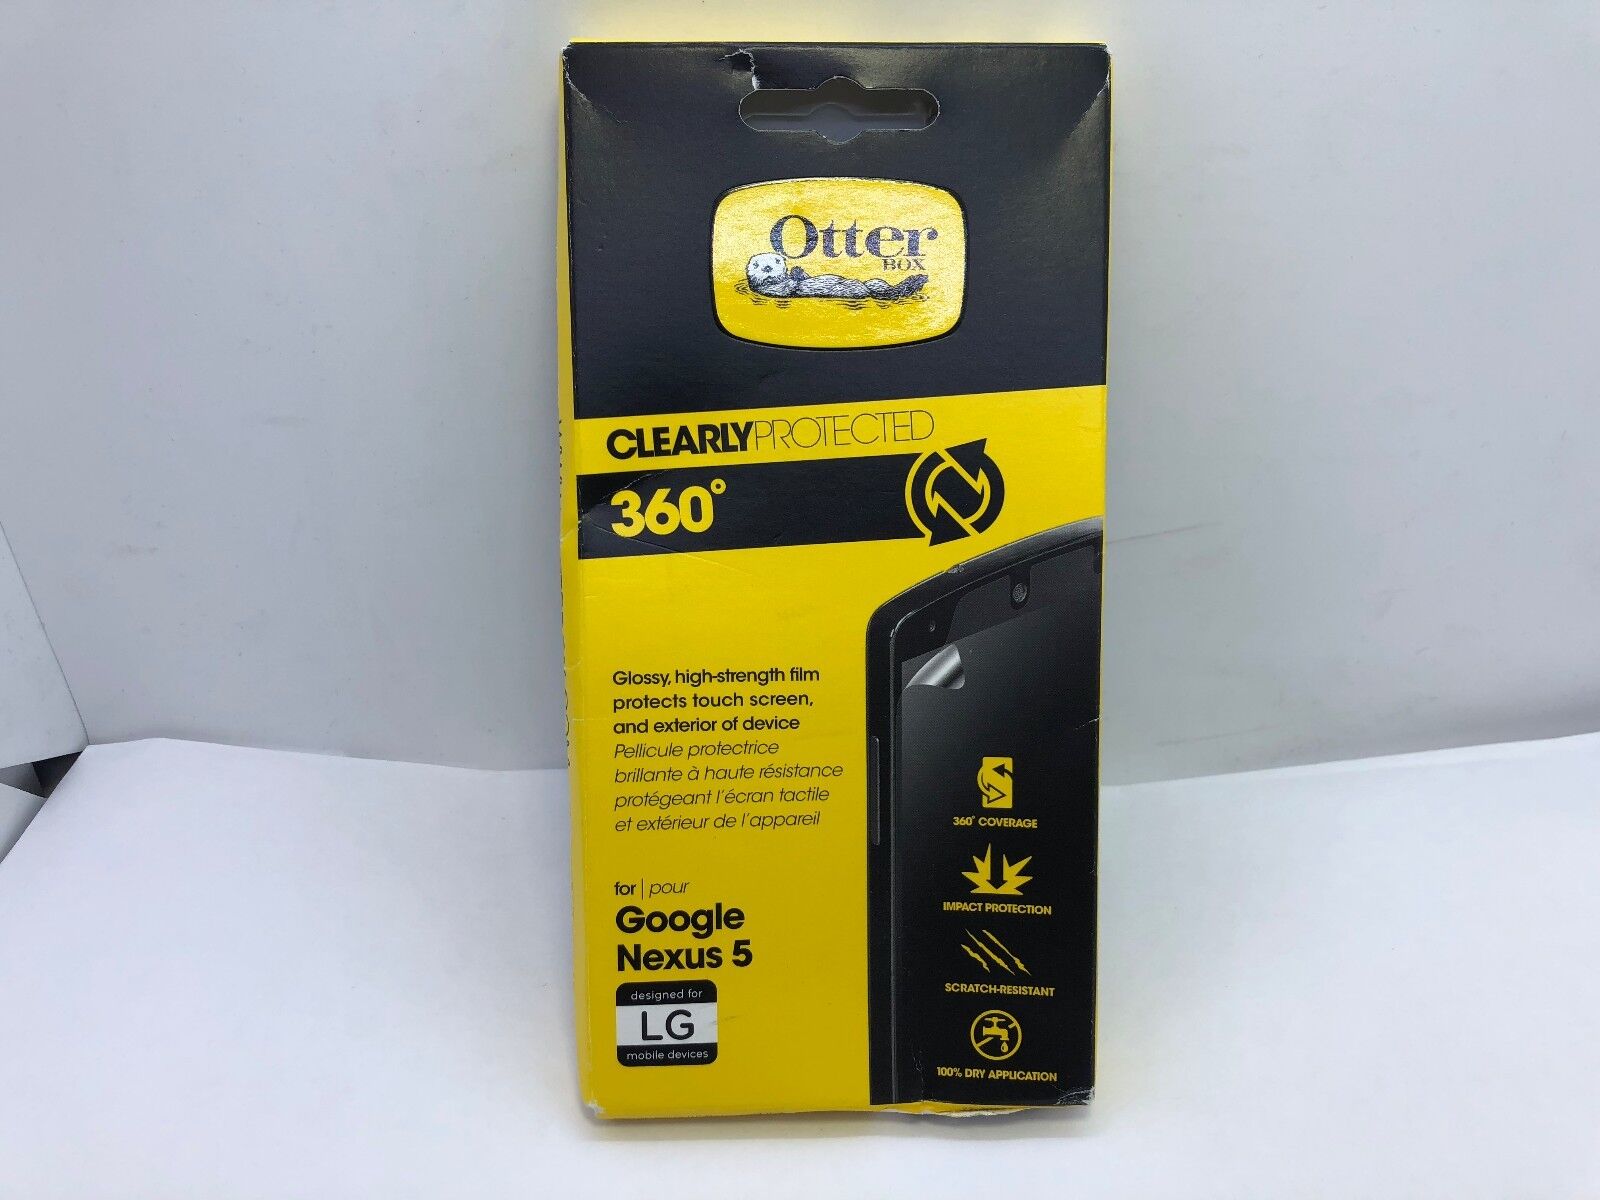  OtterBox Clearly Protected 360 Degree Screen Protector for Go...